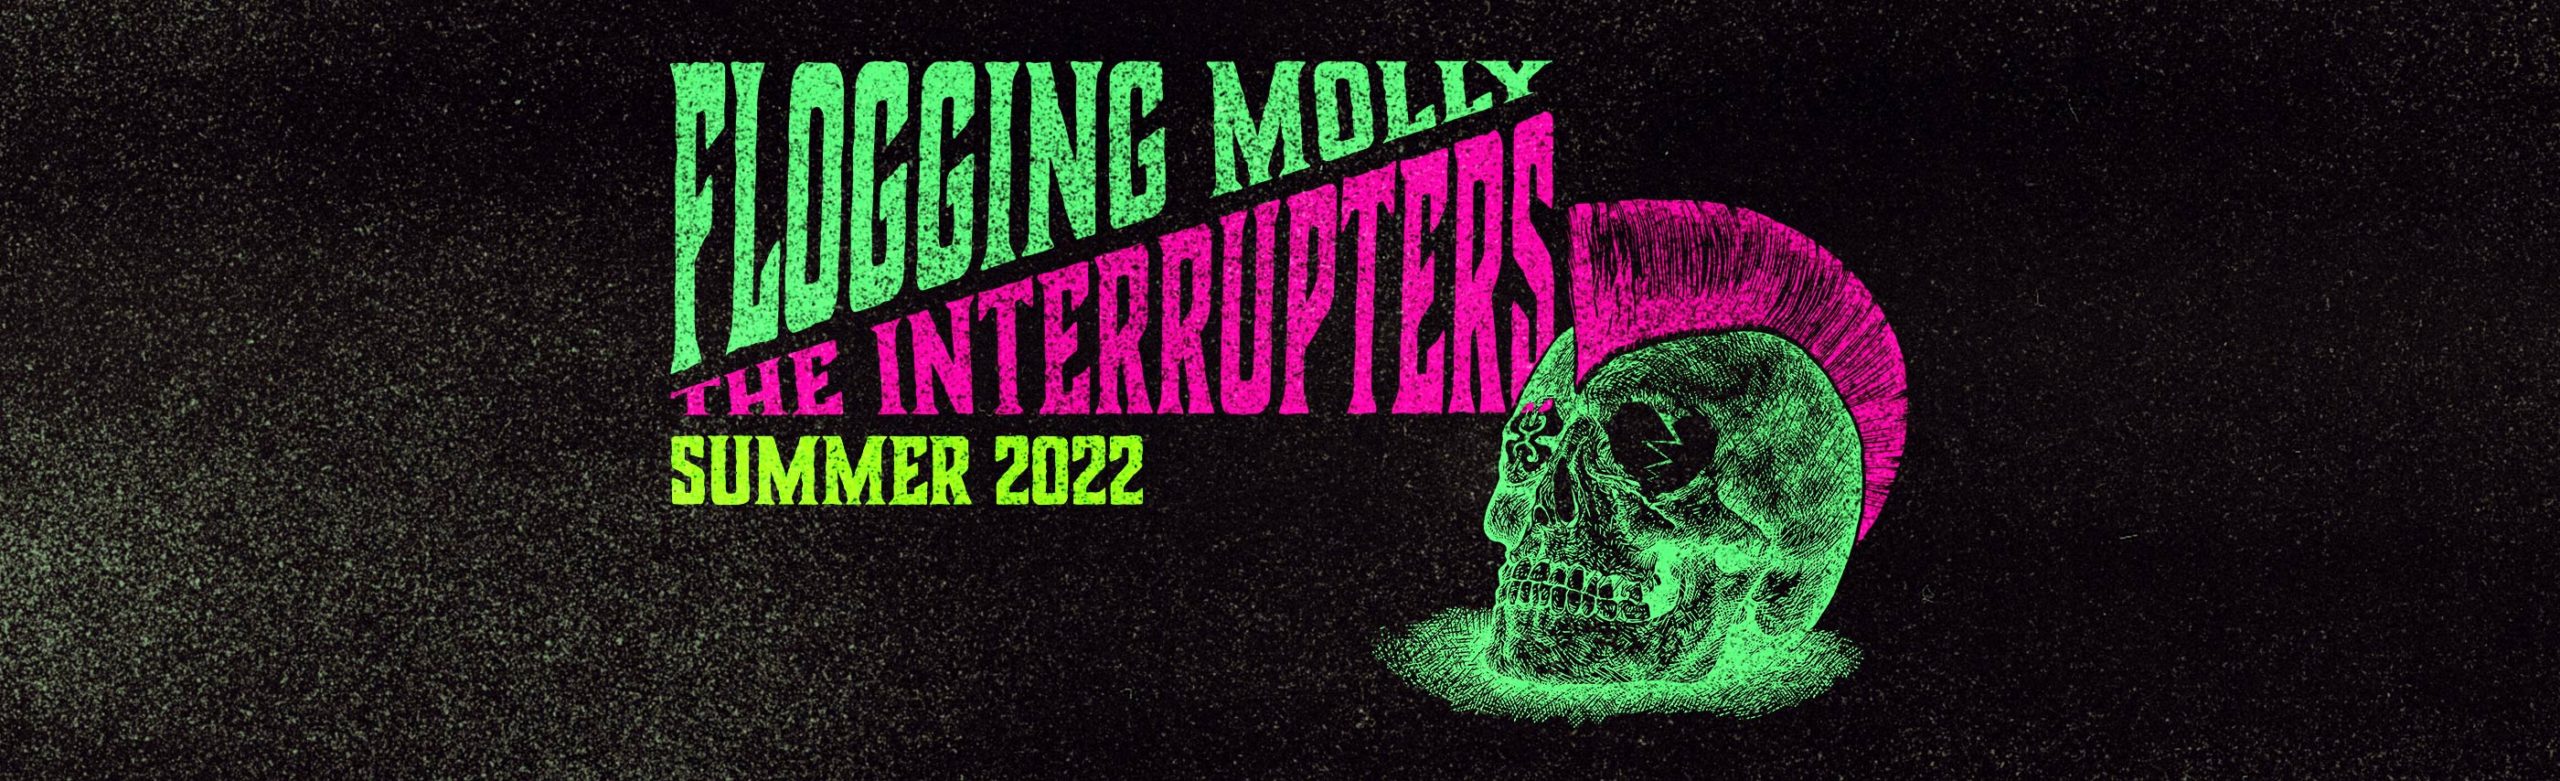 Event Info: Flogging Molly & The Interrupters at KettleHouse Amphitheater 2022 Image